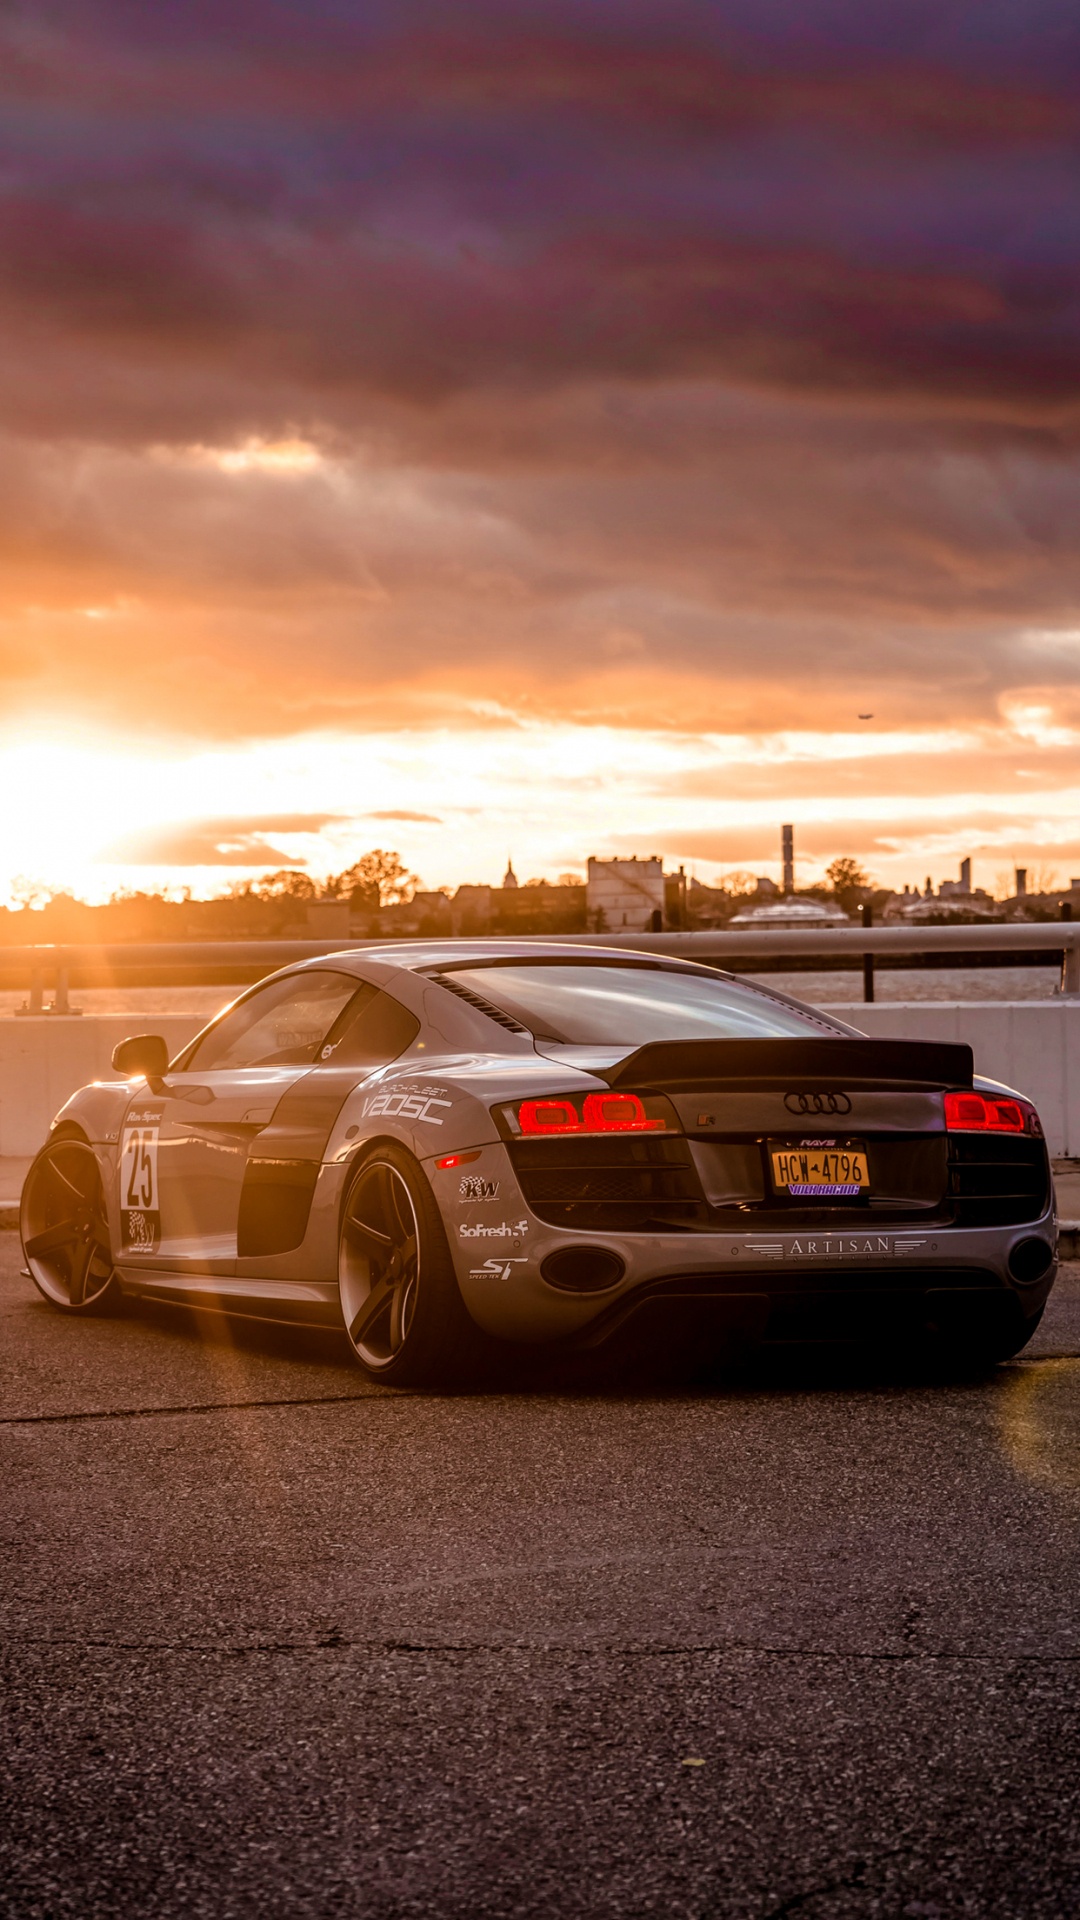 Audi R8 Photos, Download The BEST Free Audi R8 Stock Photos & HD Images